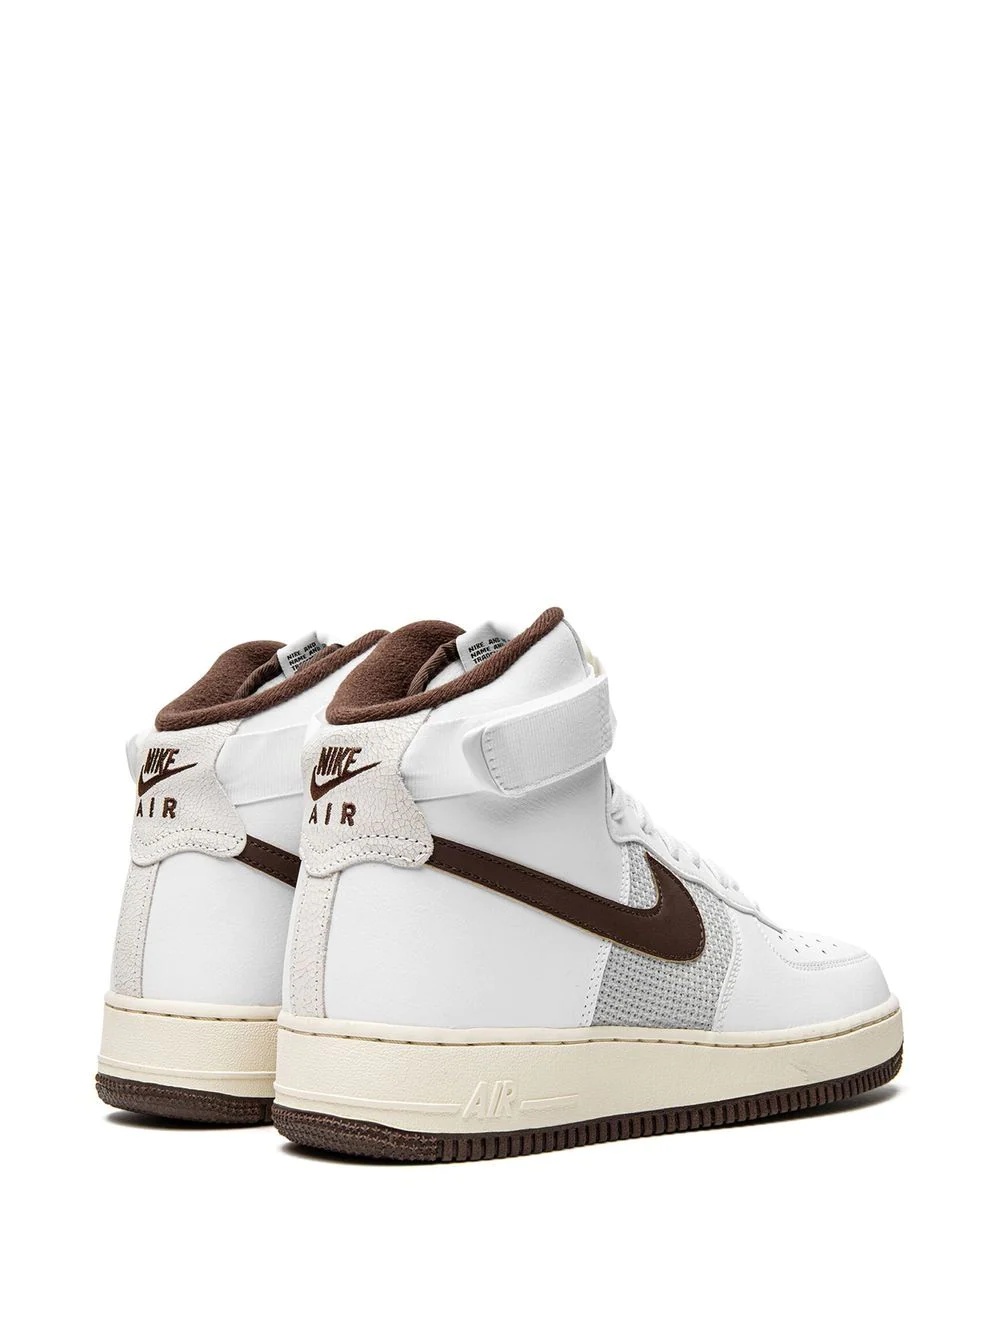 Air Force 1 High '07 "White Light Chocolate" sneakers - 3